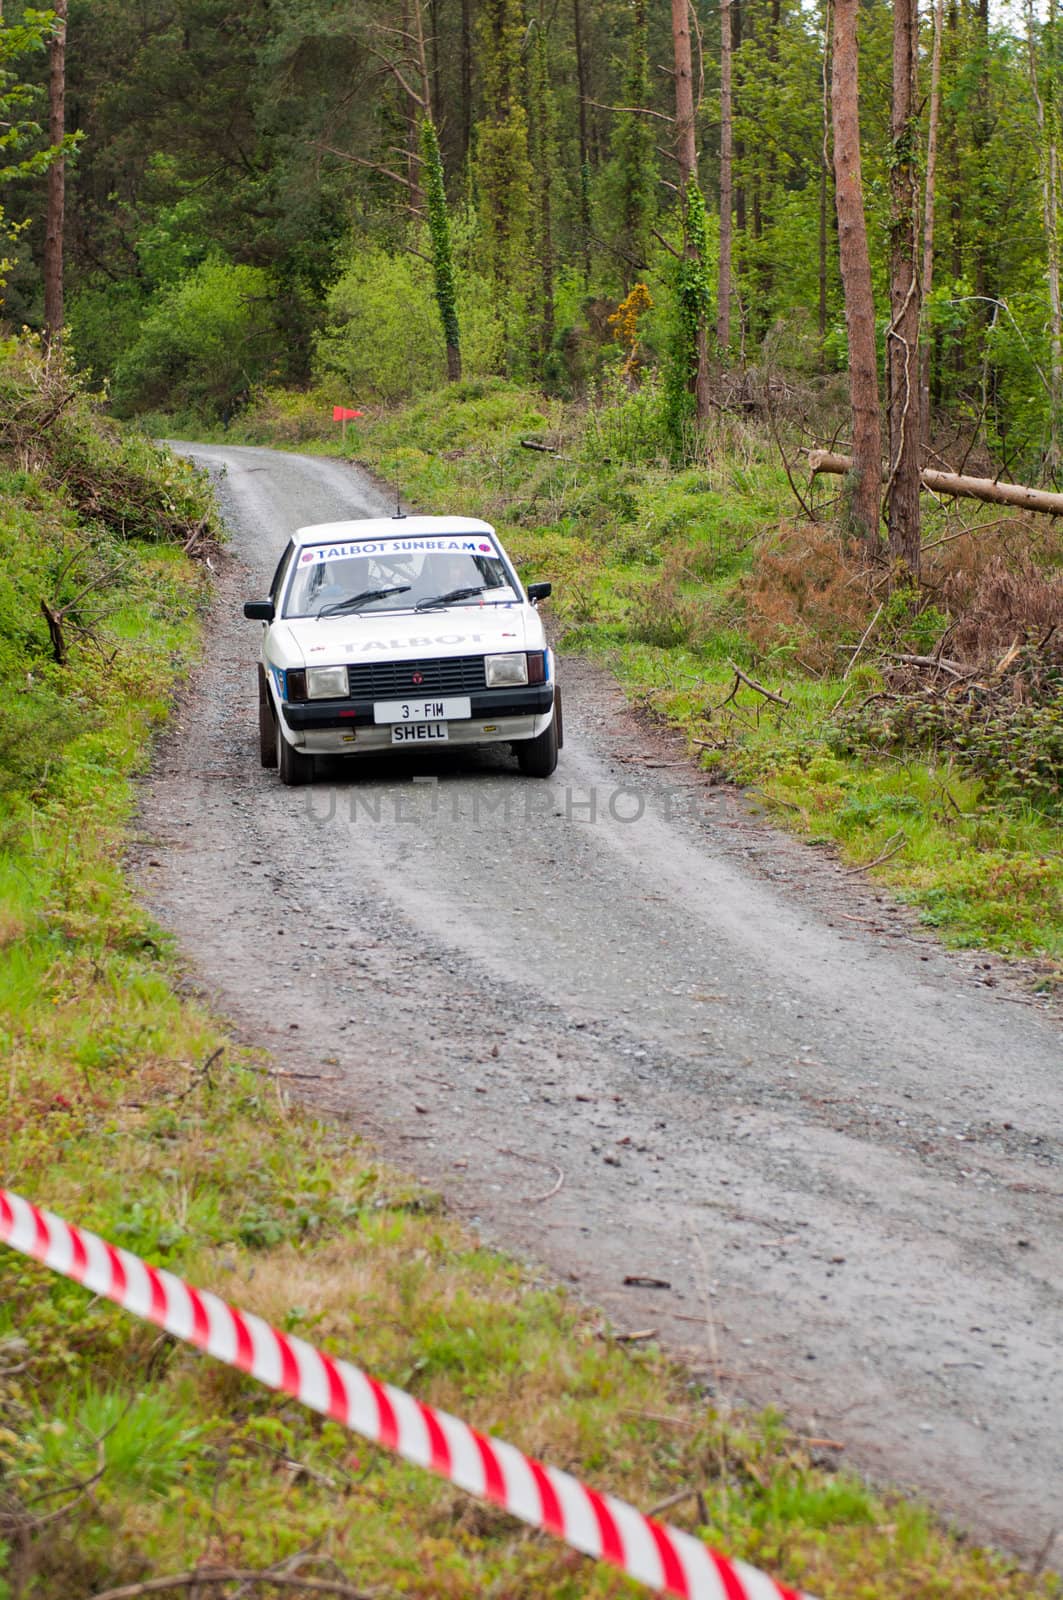 MALLOW, IRELAND - MAY 19: unidentified driver on Talbot Sunbeam at the Jim Walsh Cork Forest Rally on May 19, 2012 in Mallow, Ireland. 4th round of the Valvoline National Forest Rally Championship.